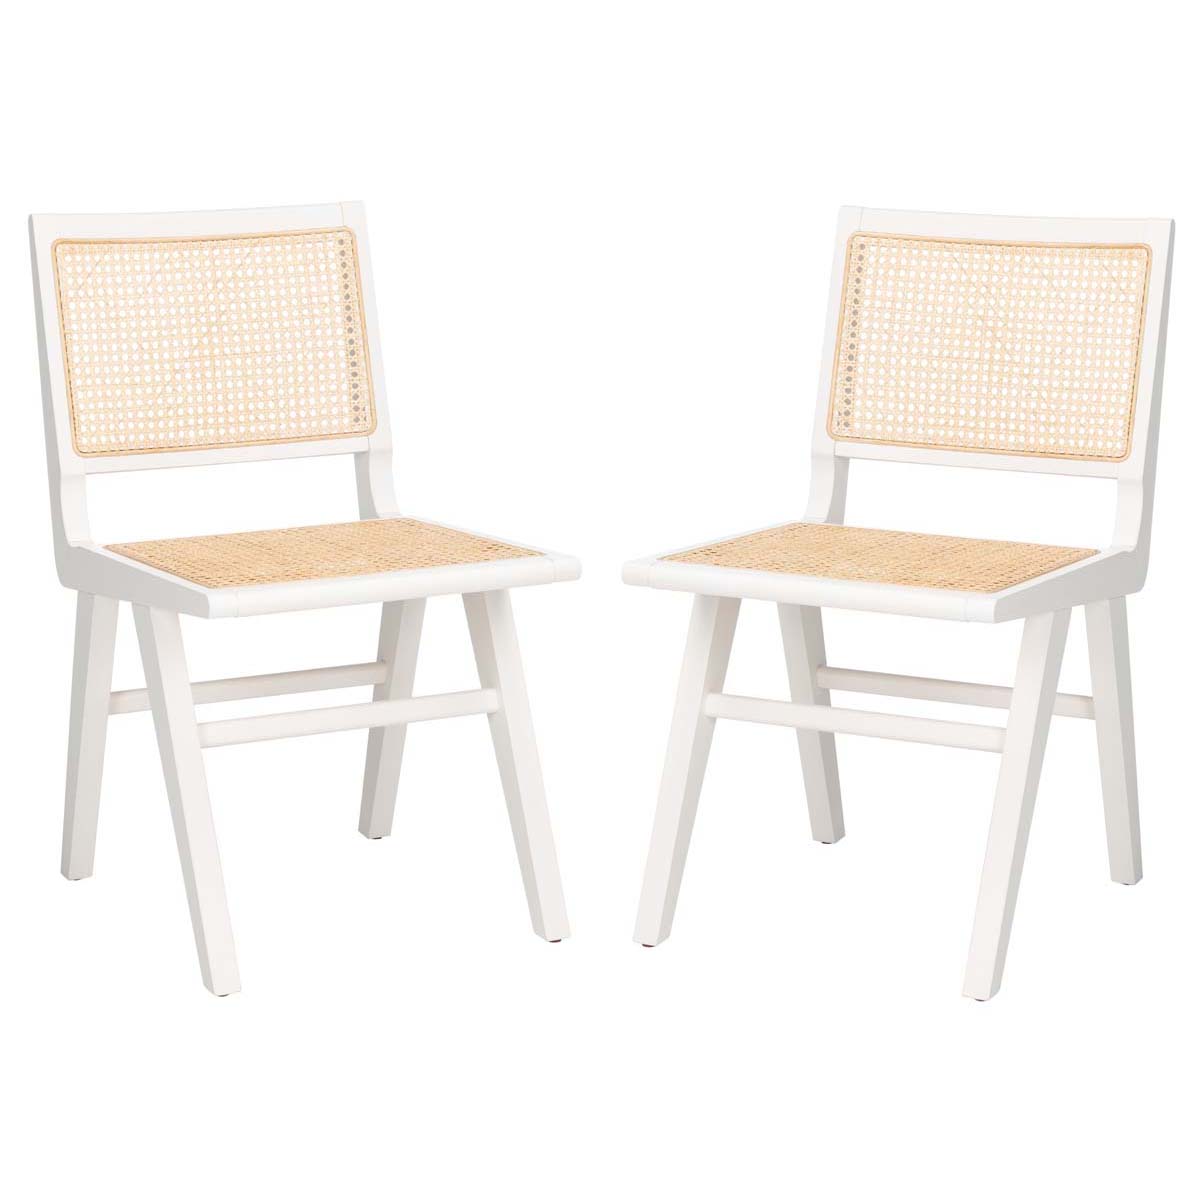 Safavieh Couture Hattie French Cane Dining Chair (Set of 2)